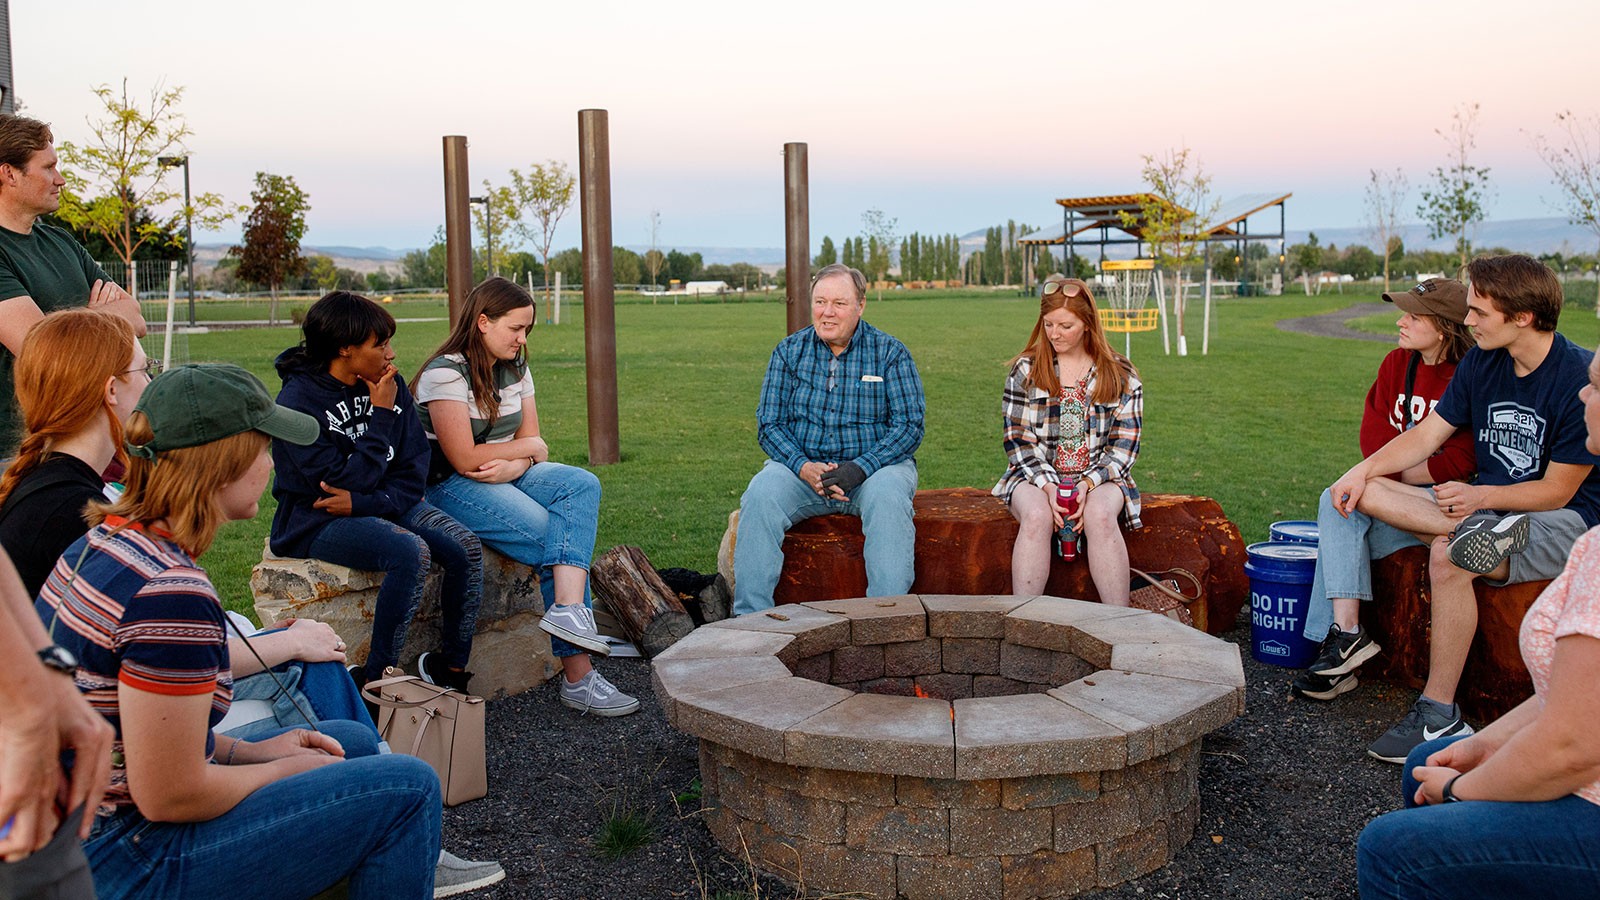 People at a fire pit in a park.